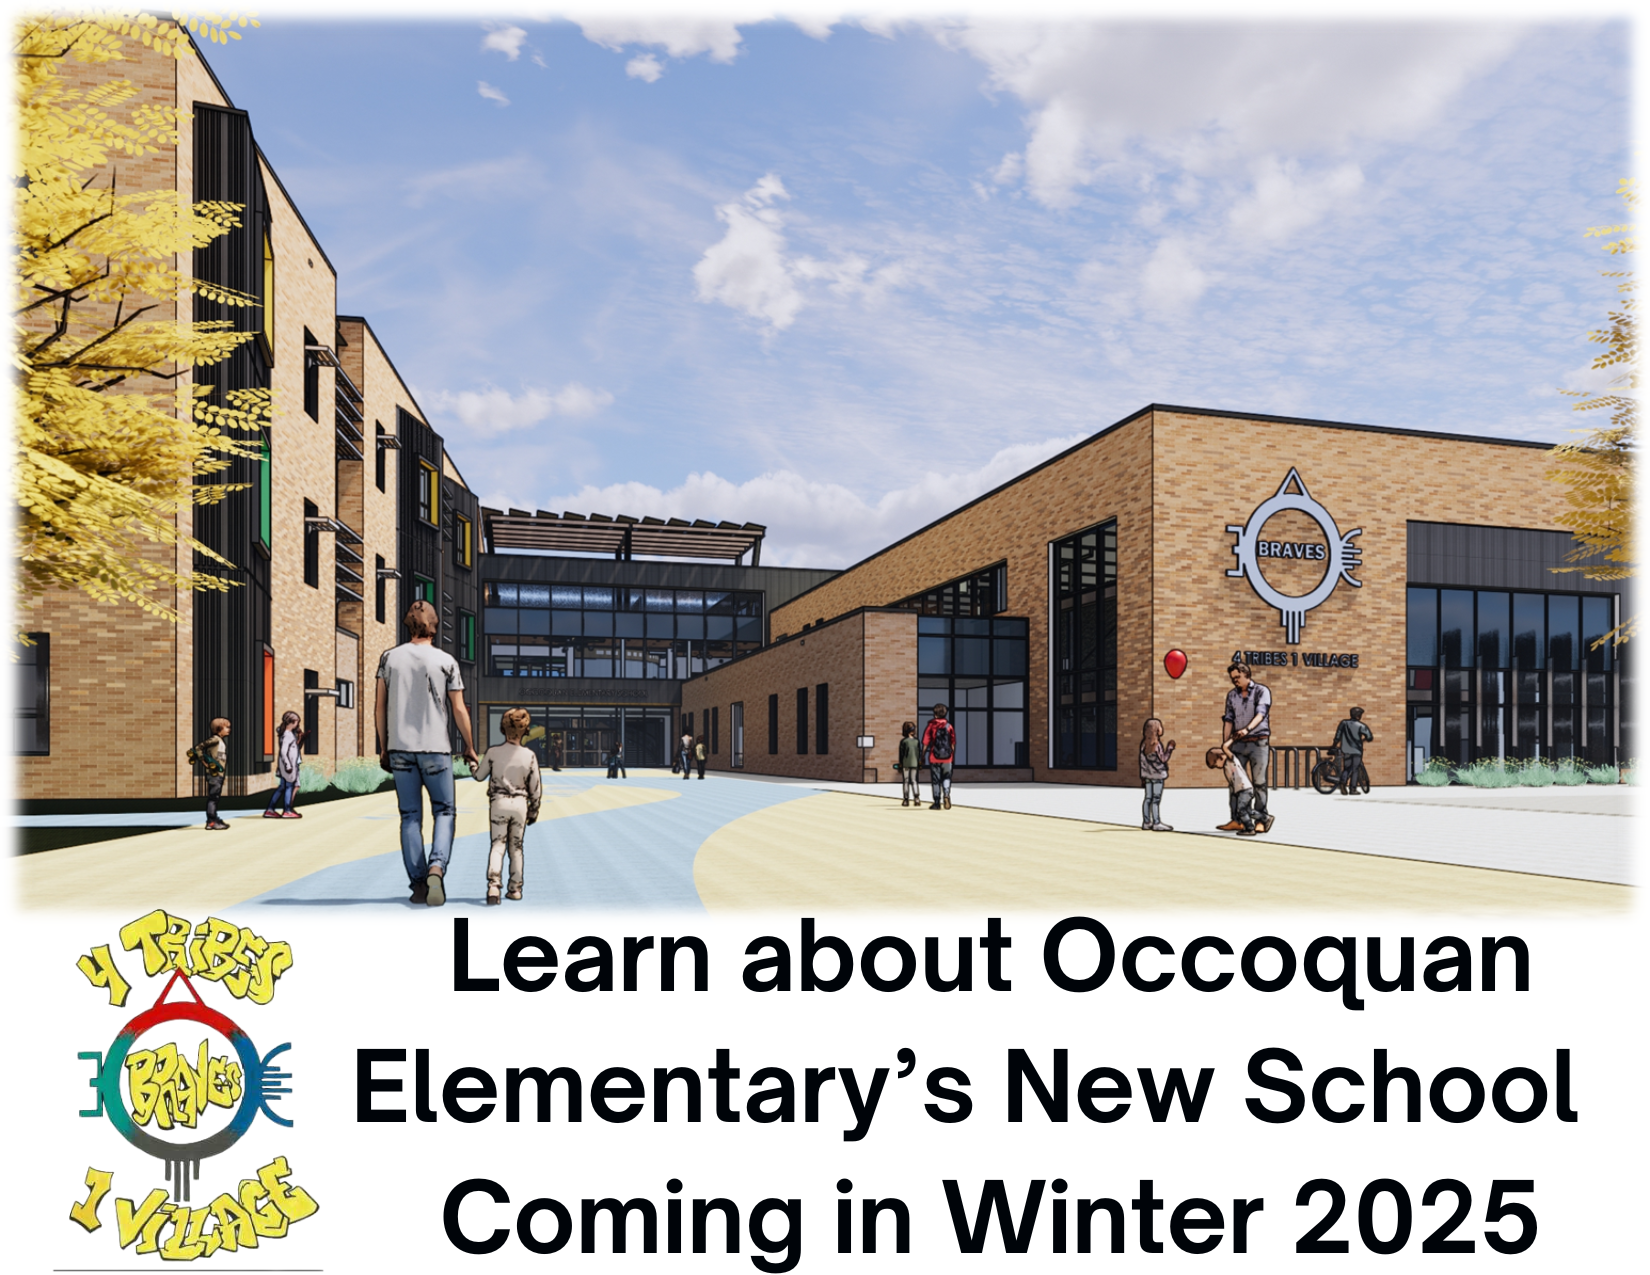 Occoquan Elementary Replacement School